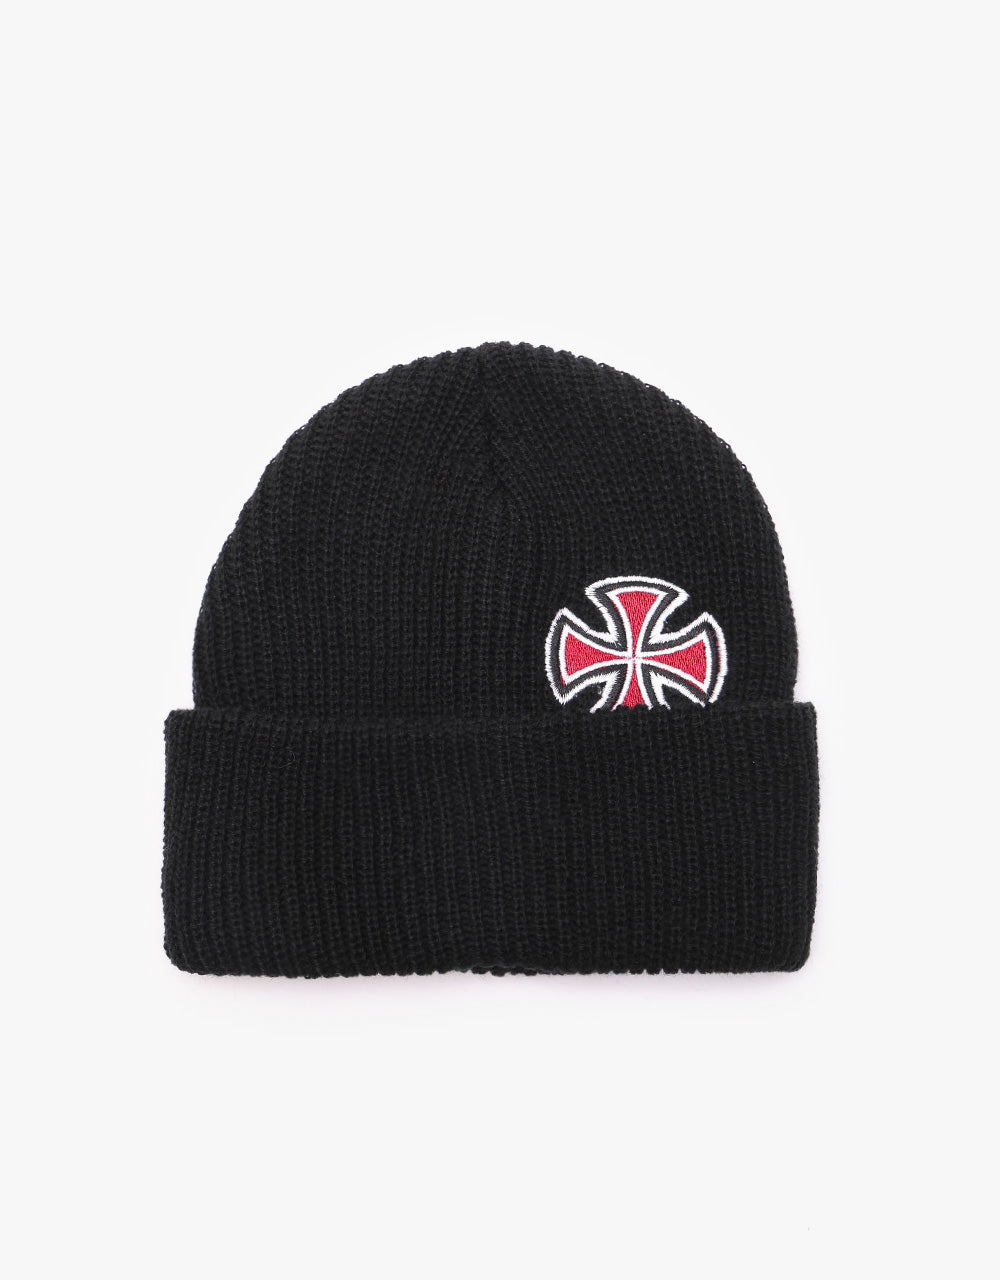 Independent Solo Cross Beanie - Black